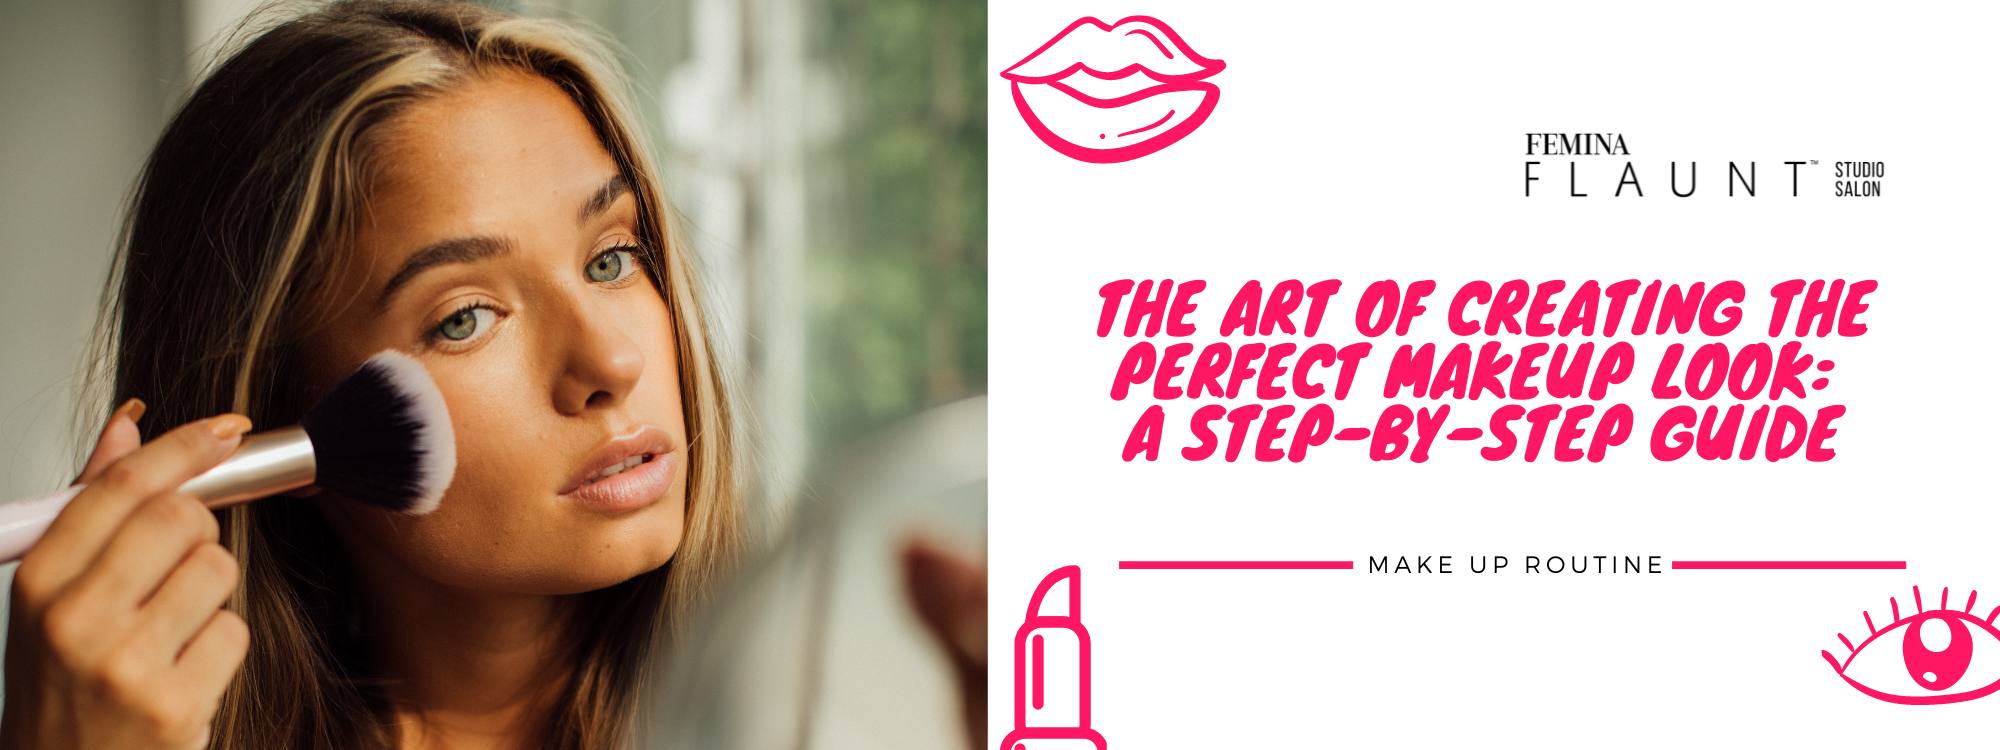 Art Of Creating The Perfect Makeup Look